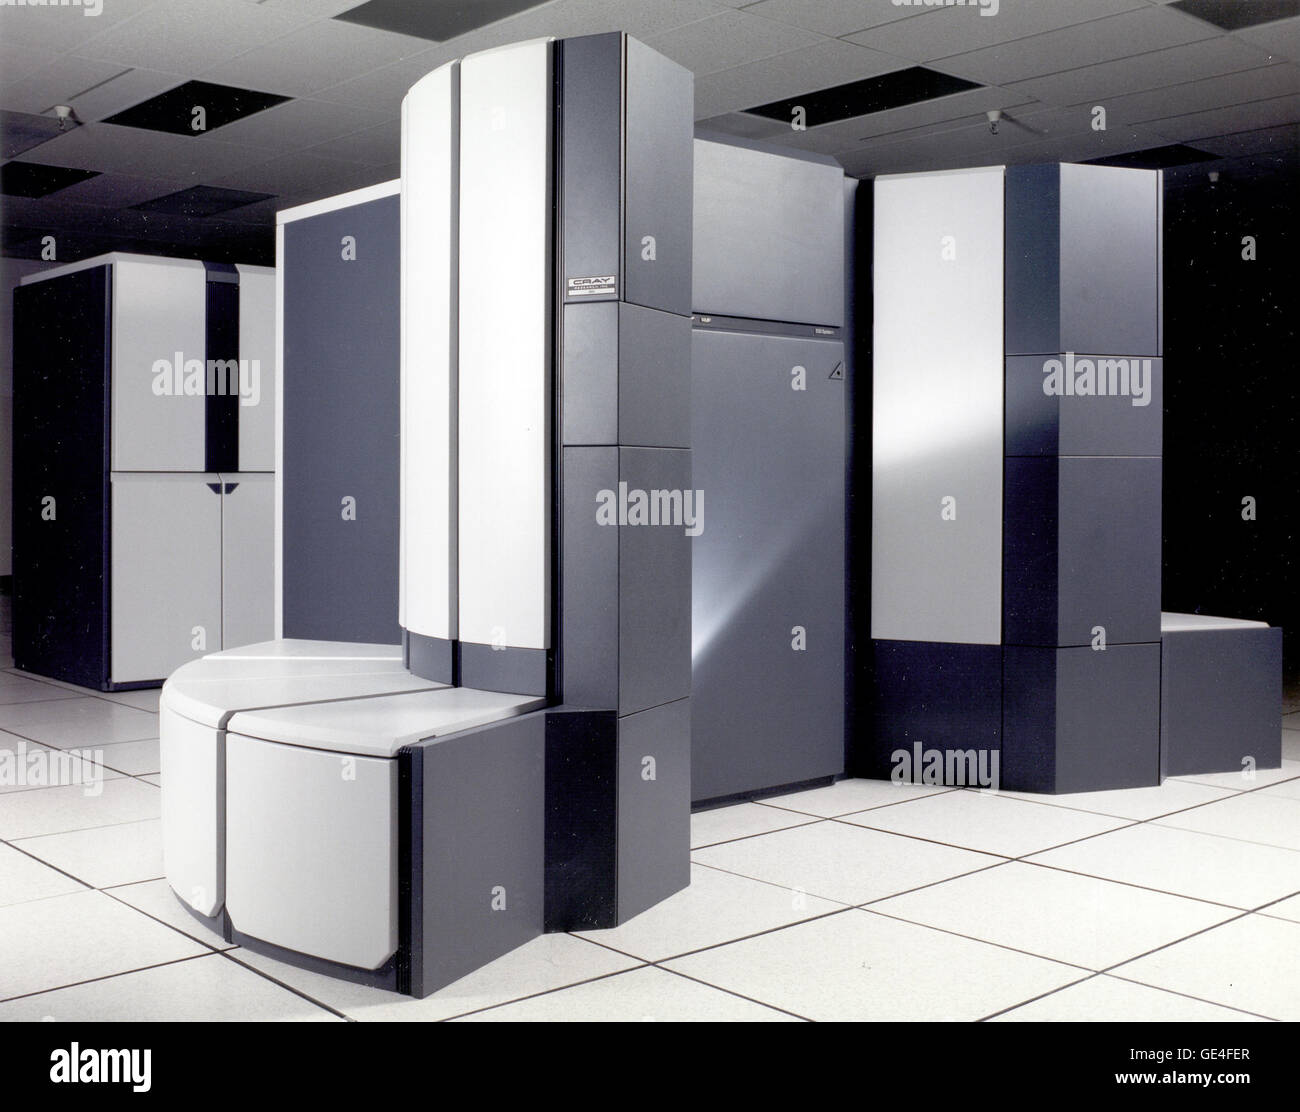 (March 1, 1990) The Cray Y 190A Supercomputer at the NASA Ames Research Center, Mountain View, California.  Image # : AC90-0121-8 Stock Photo